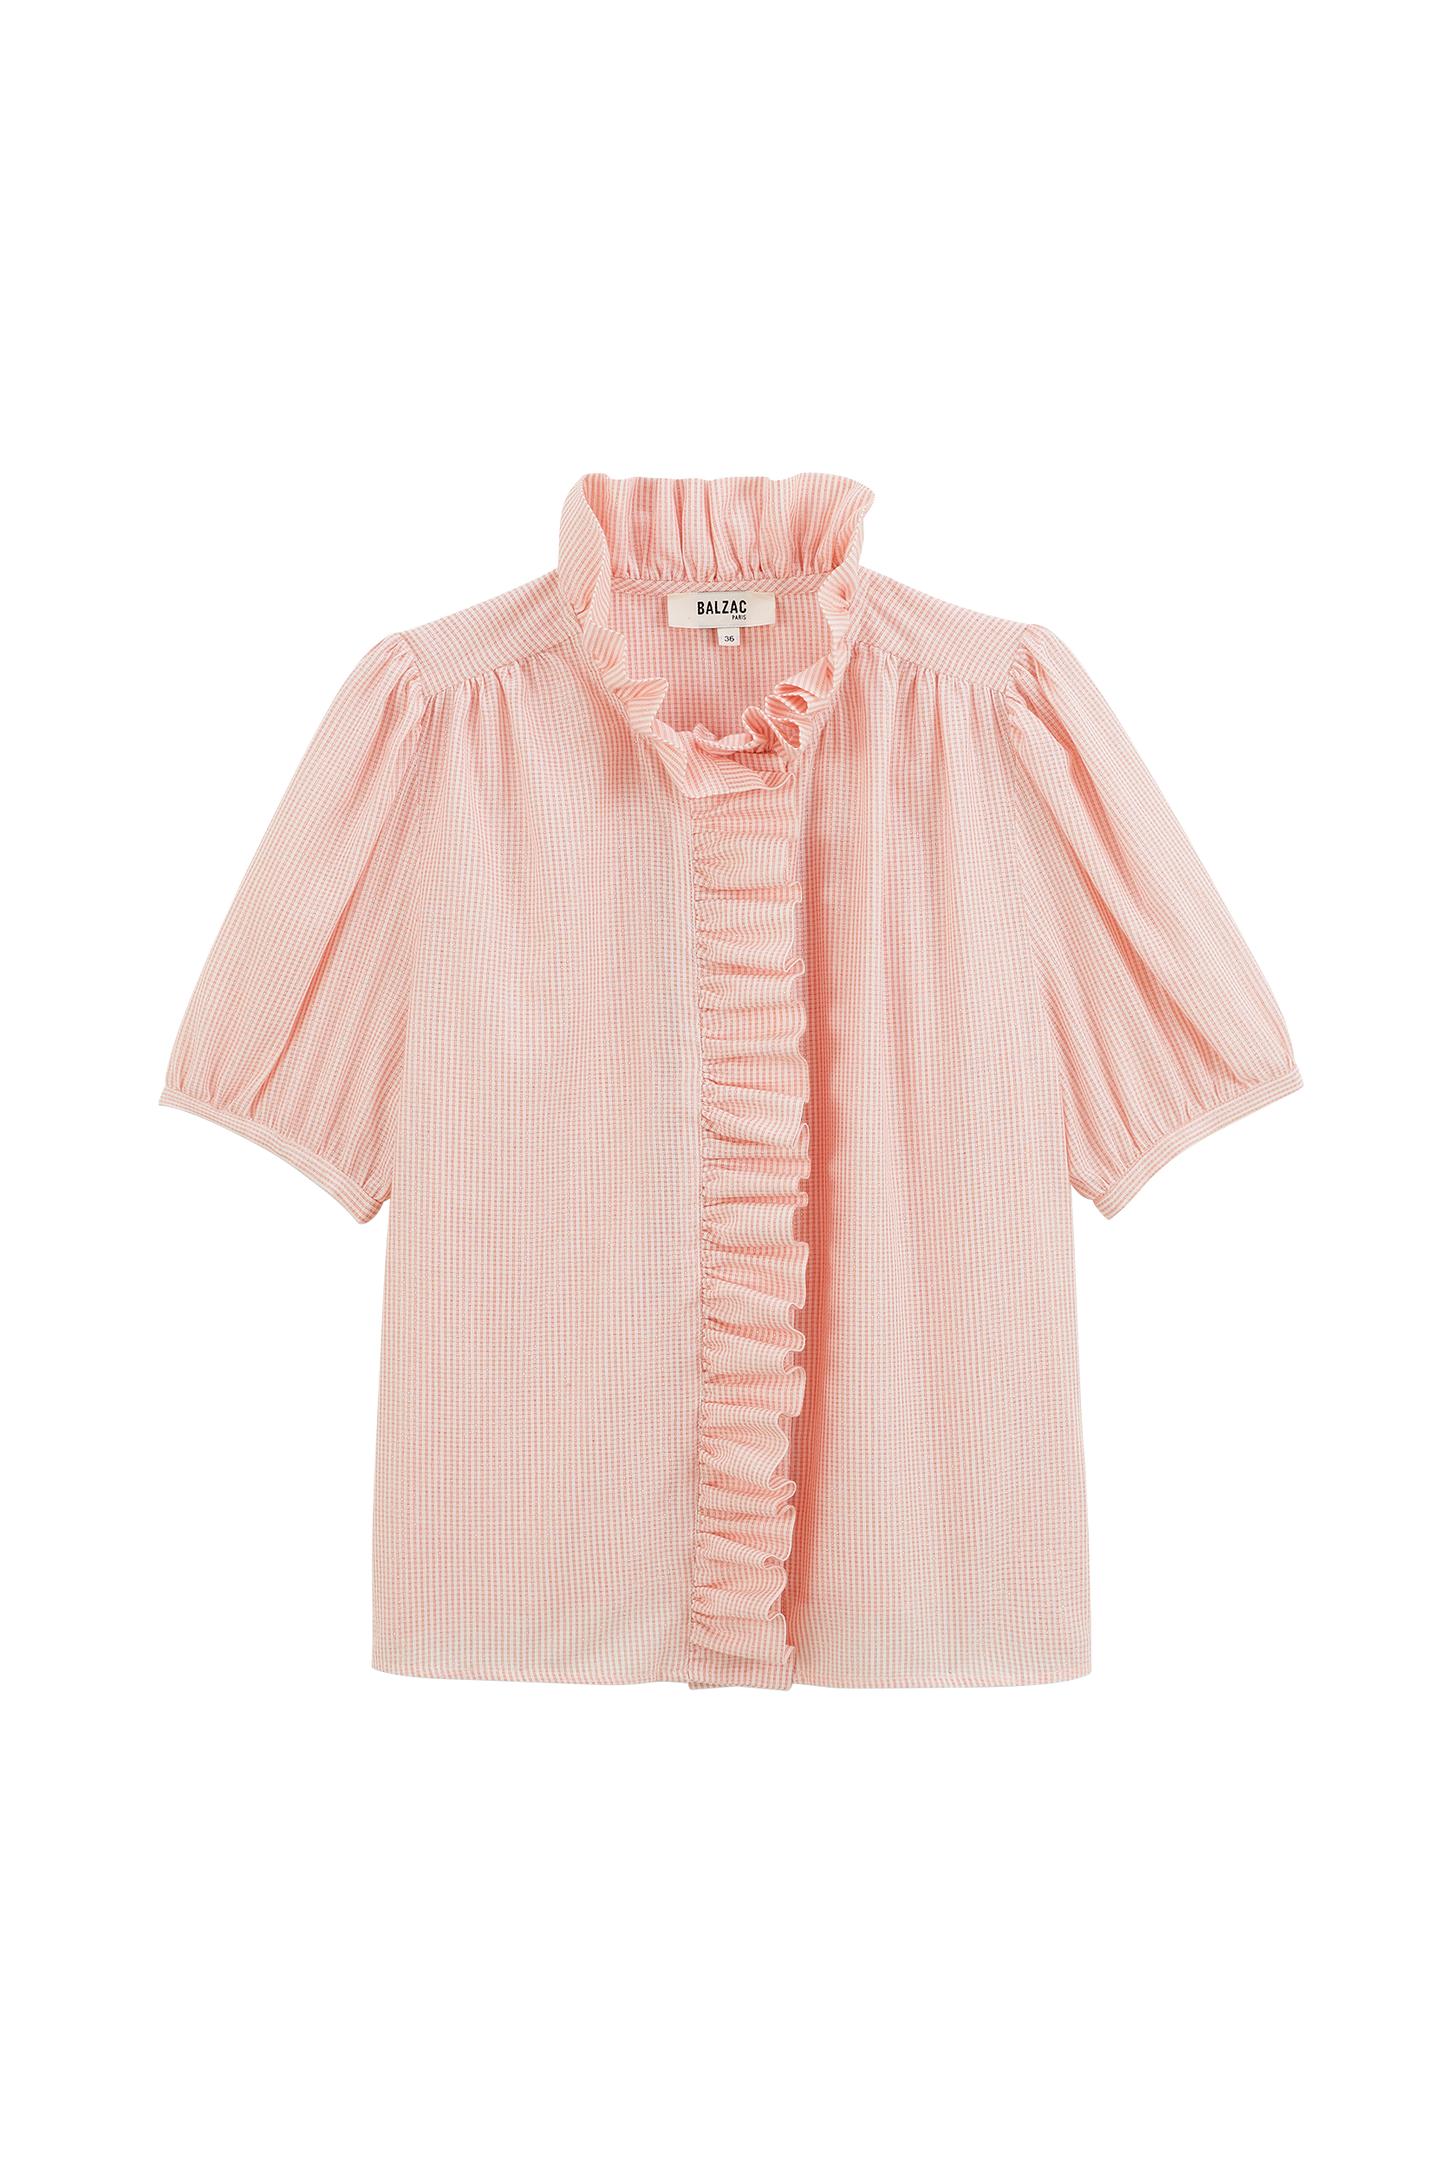 Iridescent coral striped bathing shirt